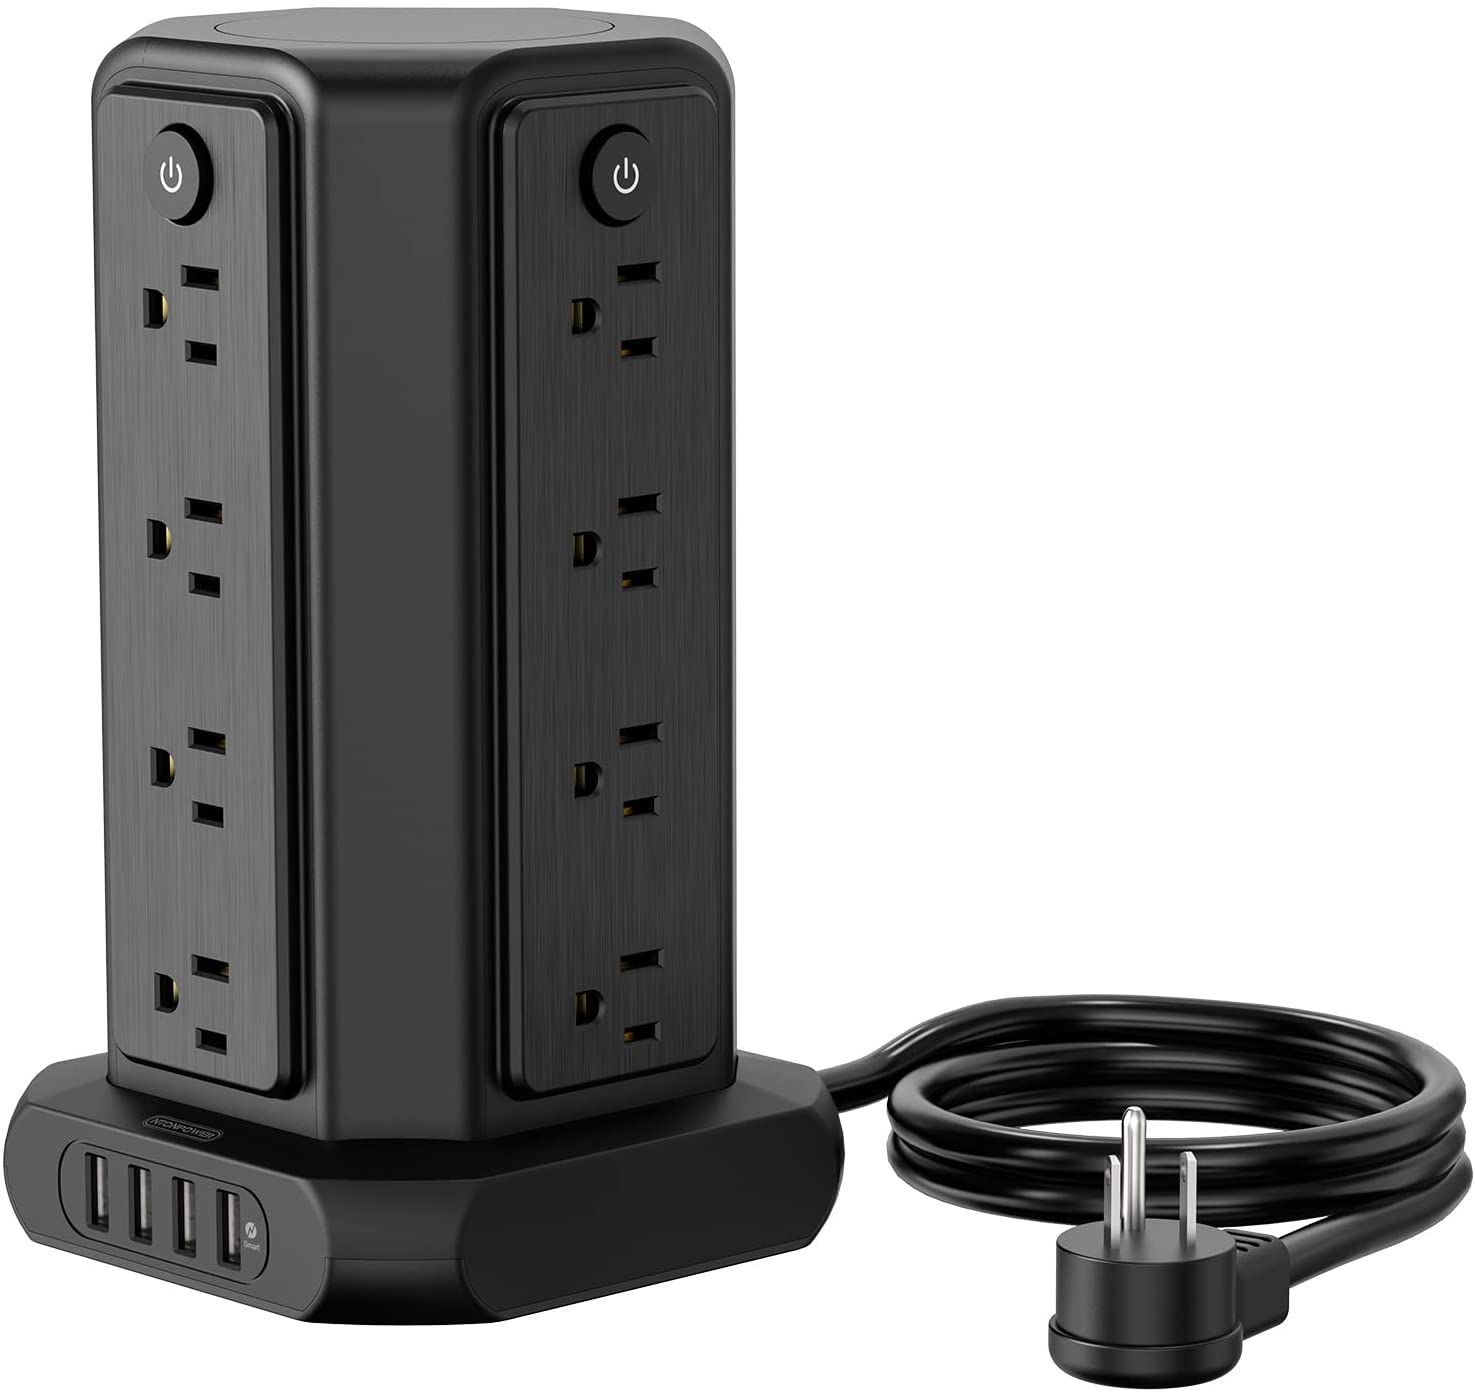 Ntonpower Surge Protector Power Strip Tower 16 Outlets 4 USB 1080J